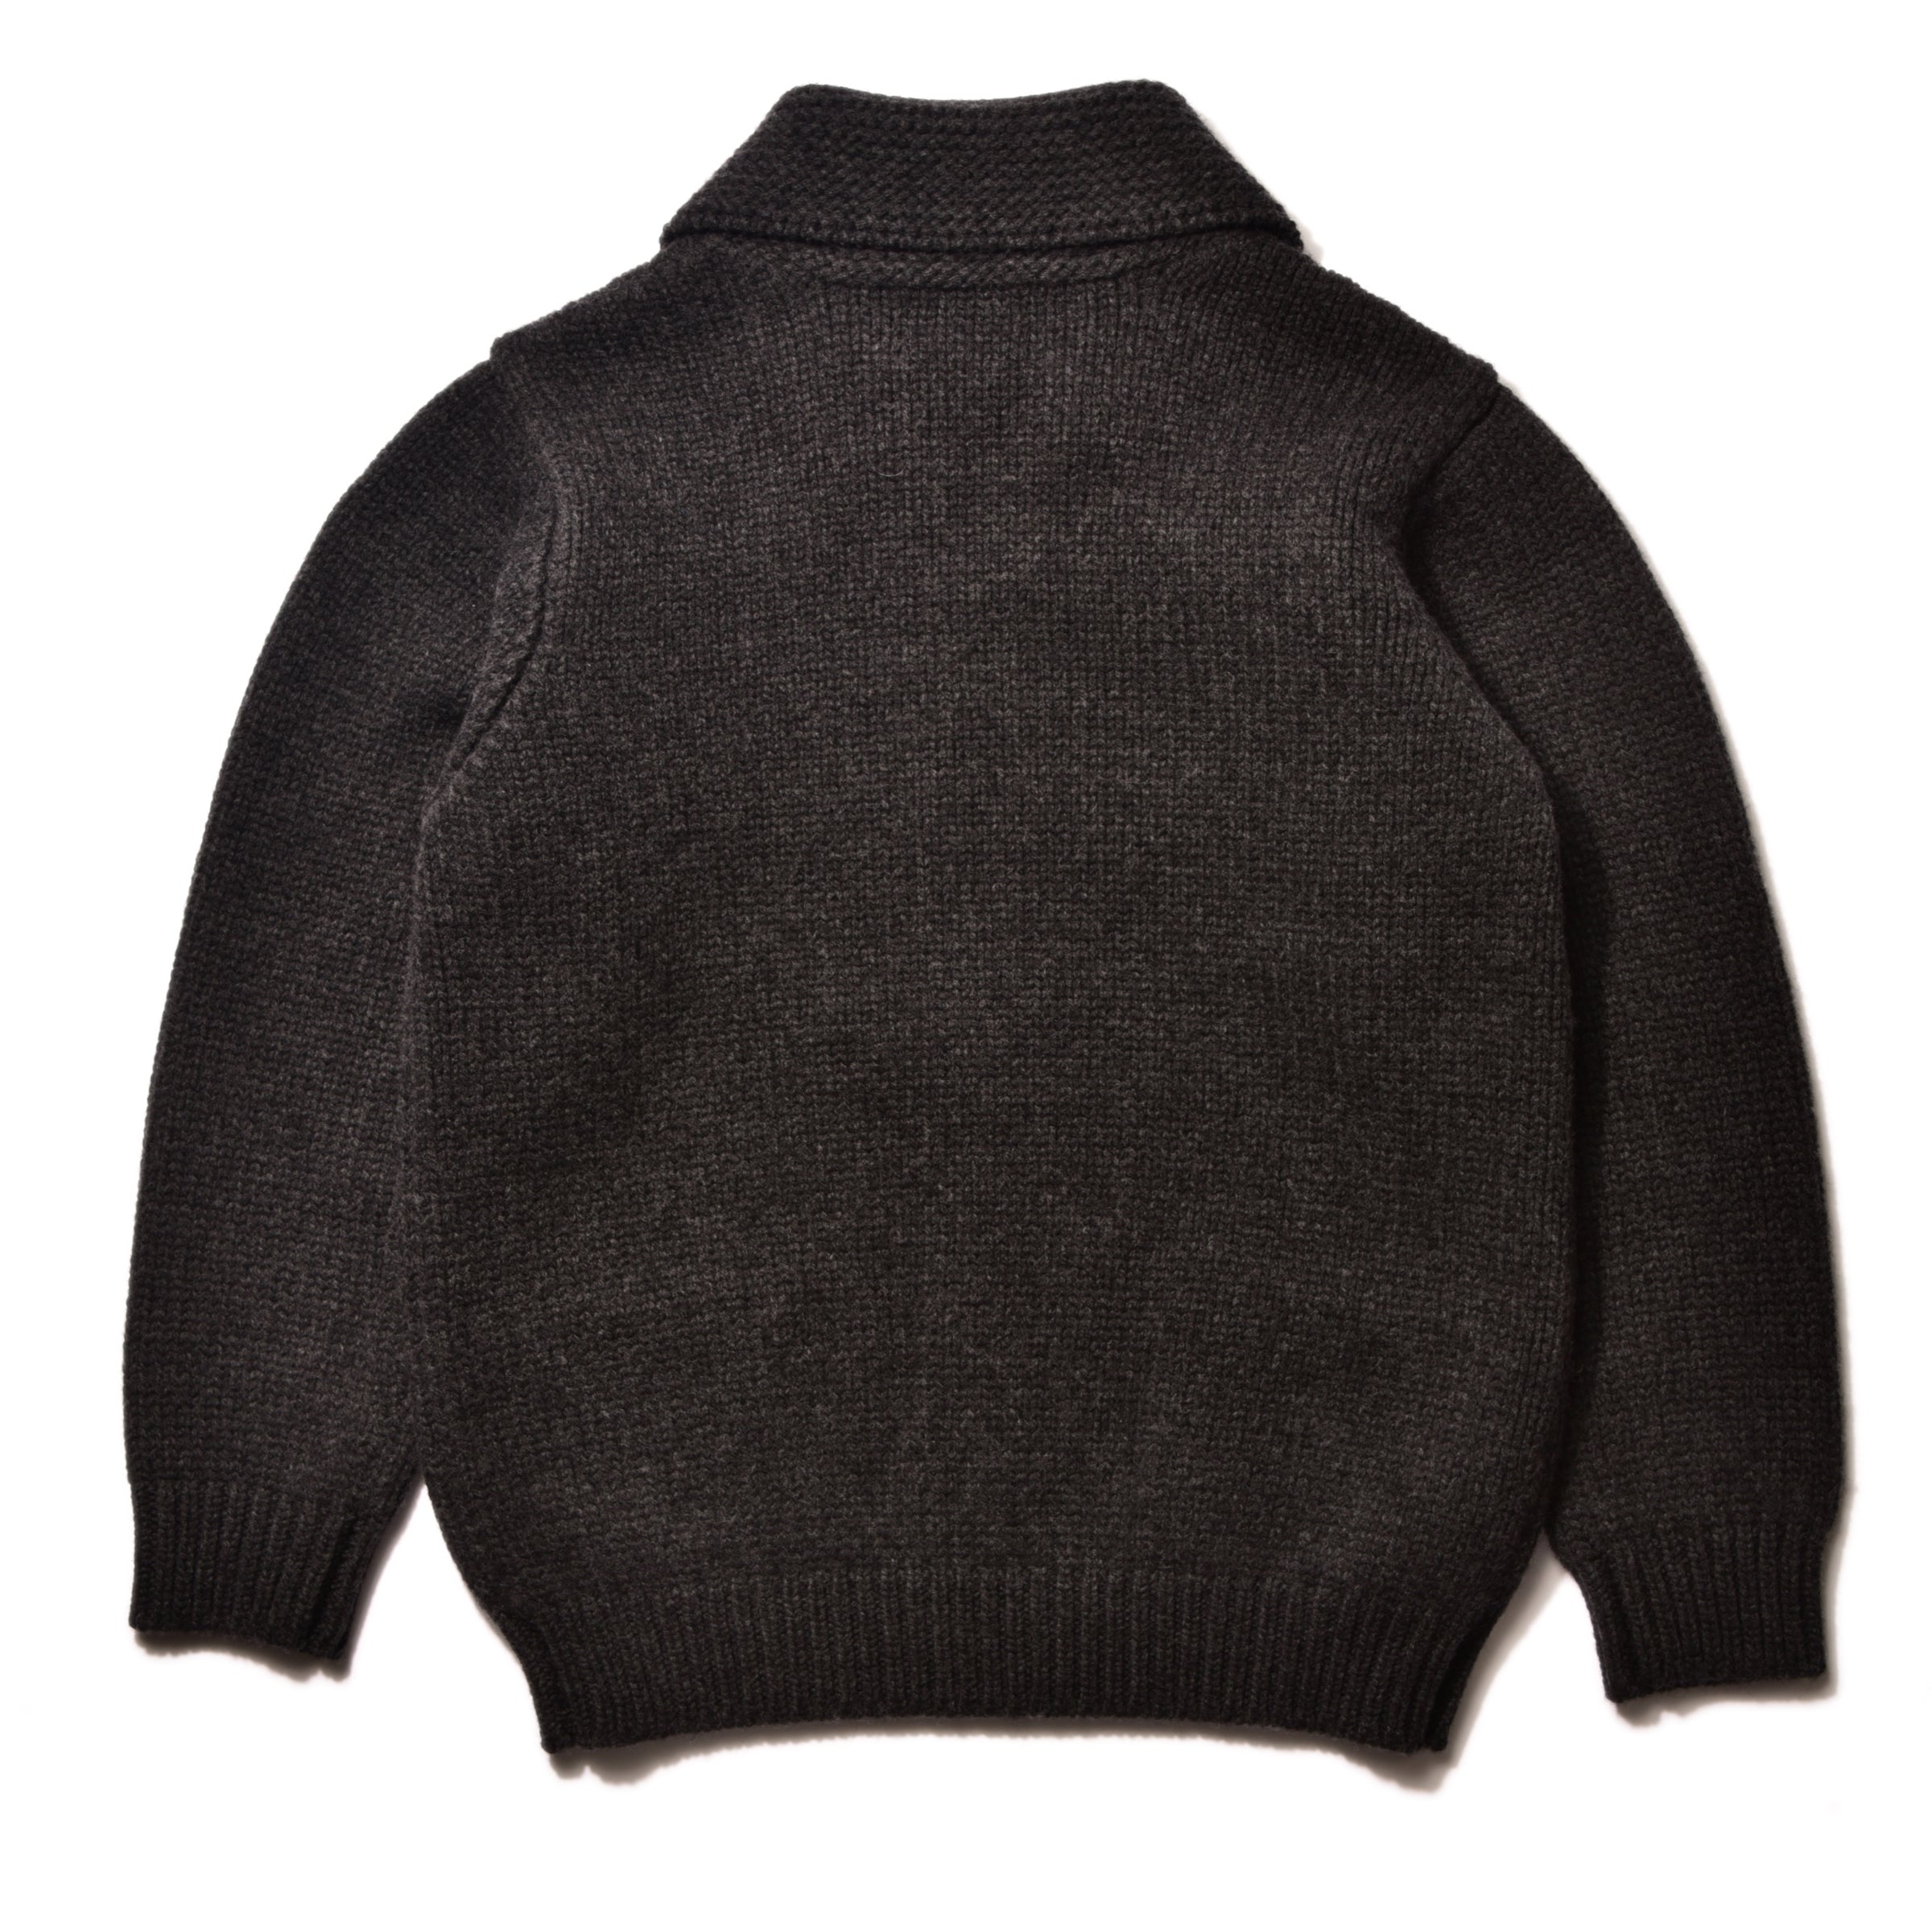 HEAVY WOOL CASHMERE SWEATER – The Real McCoy's